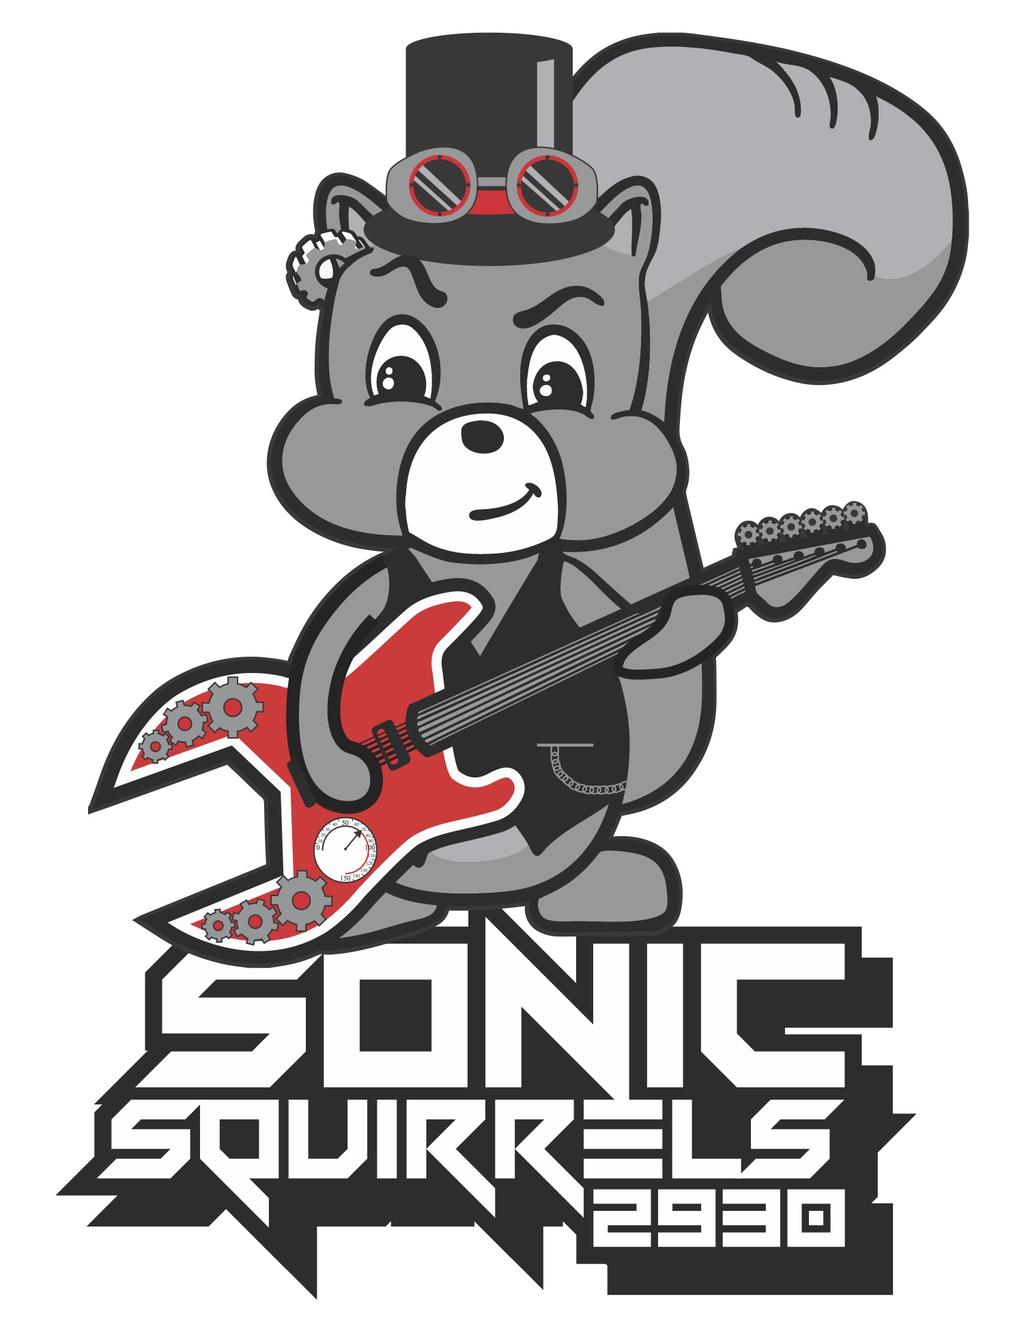 January 2017 Dear Prospective Sponsor, What should you do if you see a giant squirrel walking down the street, dancing and playing a light-up guitar? Look for the robot, of course!